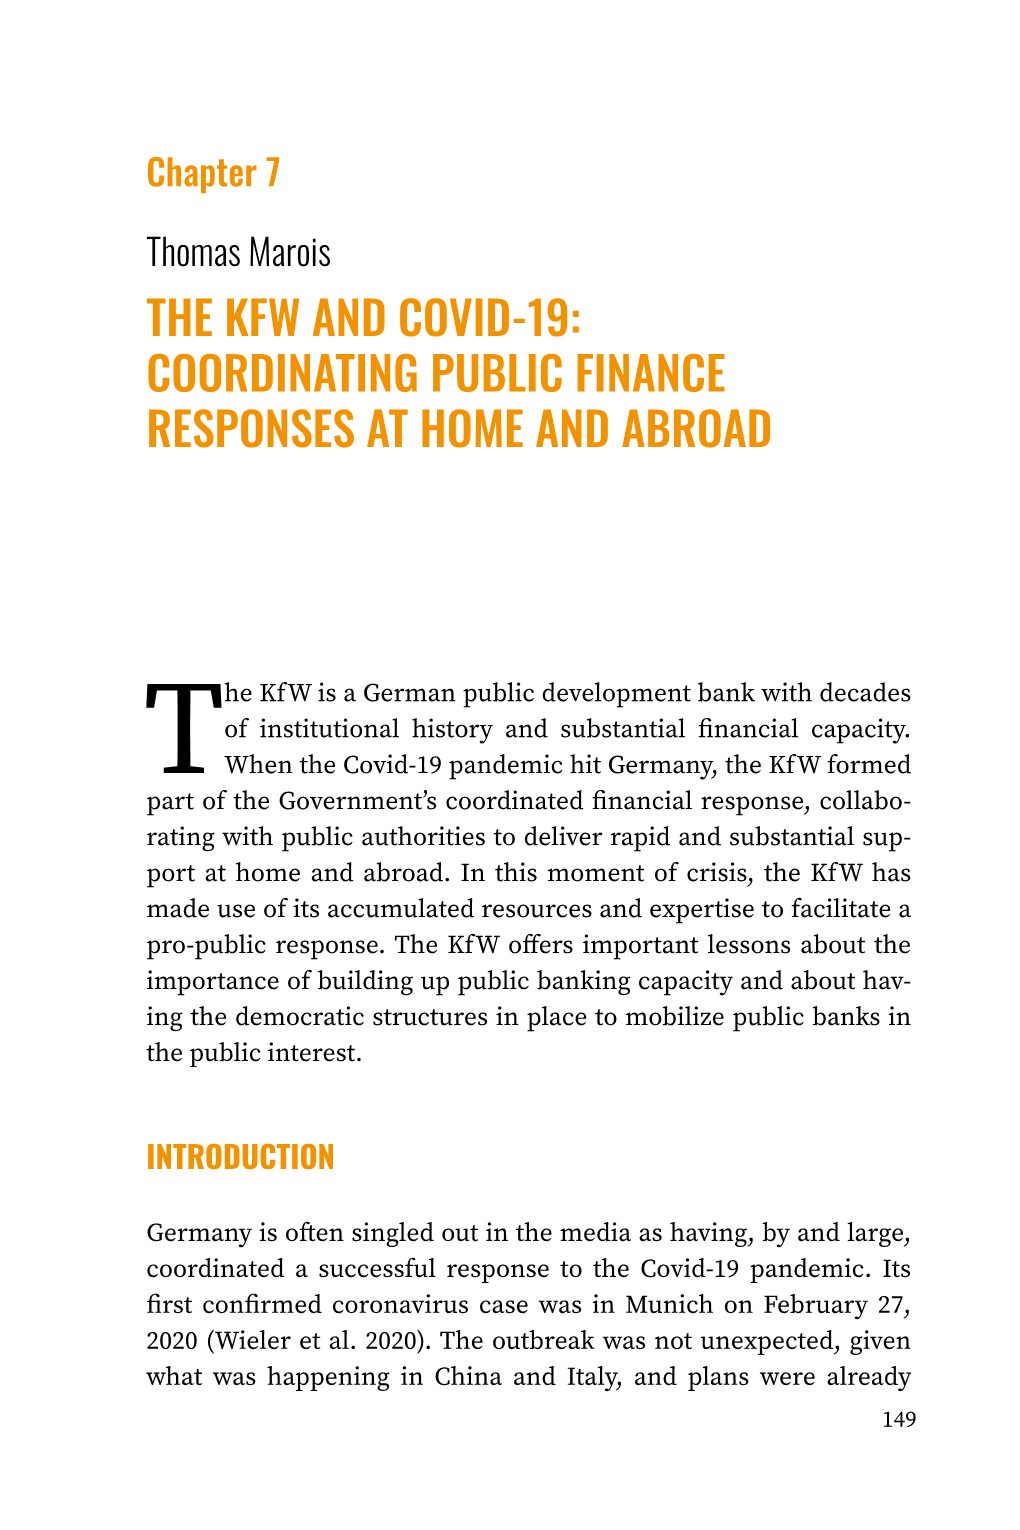 The Kfw and Covid-19: Coordinating Public Finance Responses at Home and Abroad